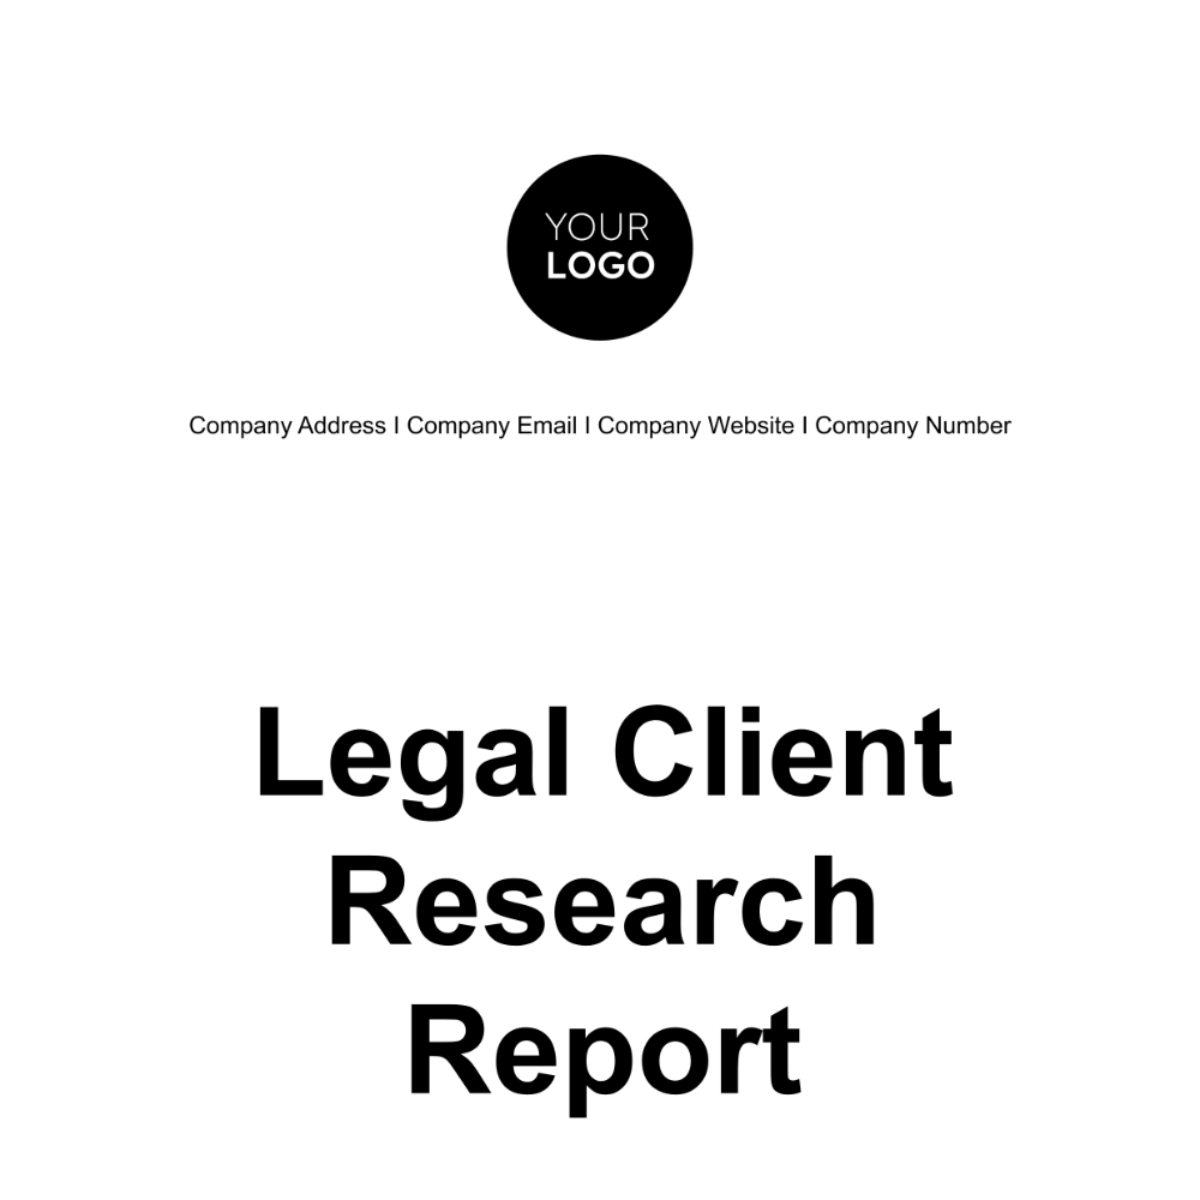 Free Legal Client Research Report Template